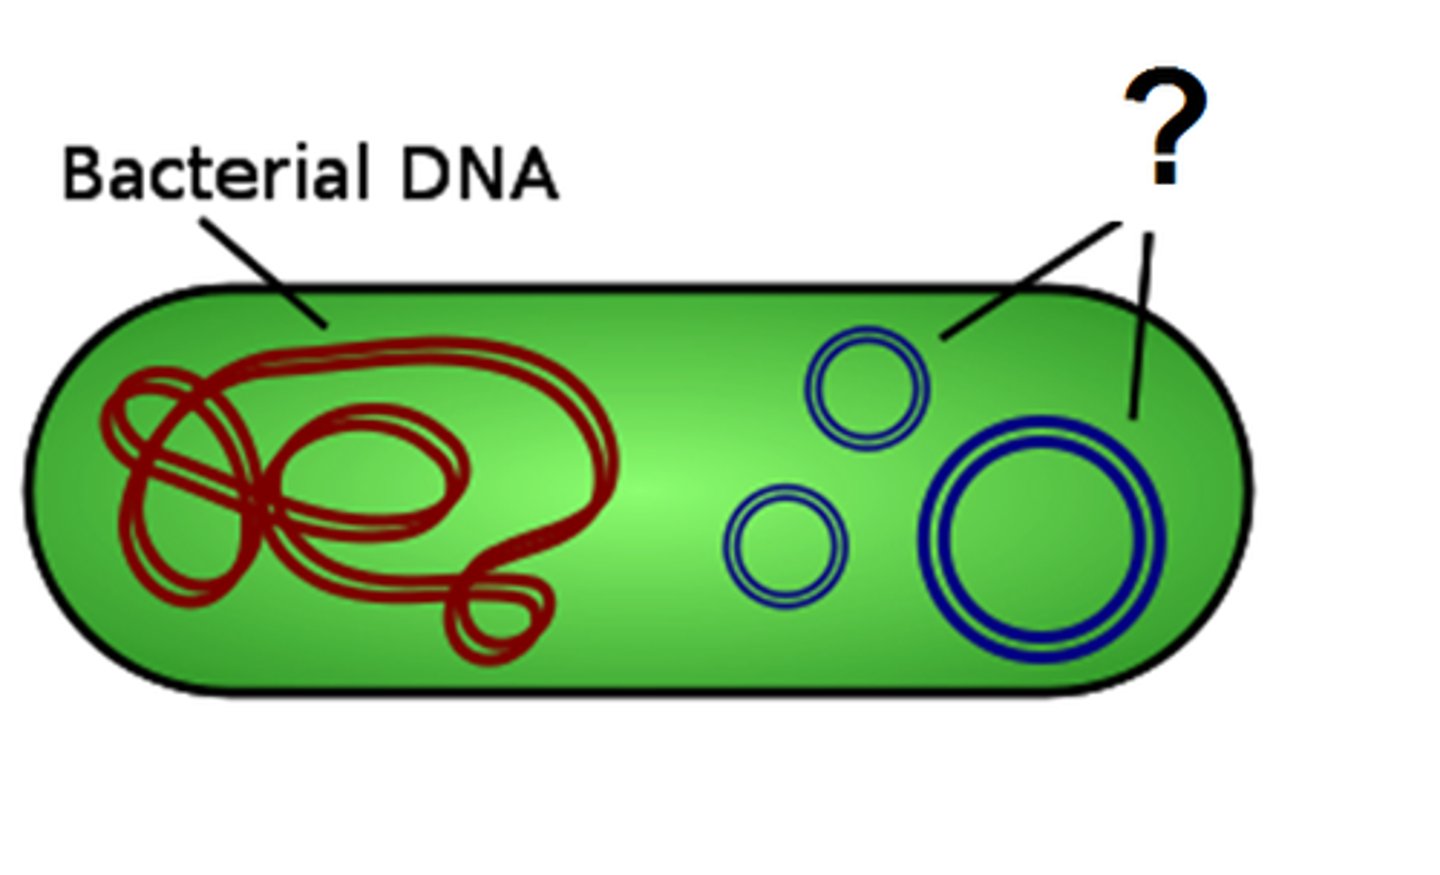 <p>small, circular piece of DNA located in the cytoplasm of many bacteria</p>